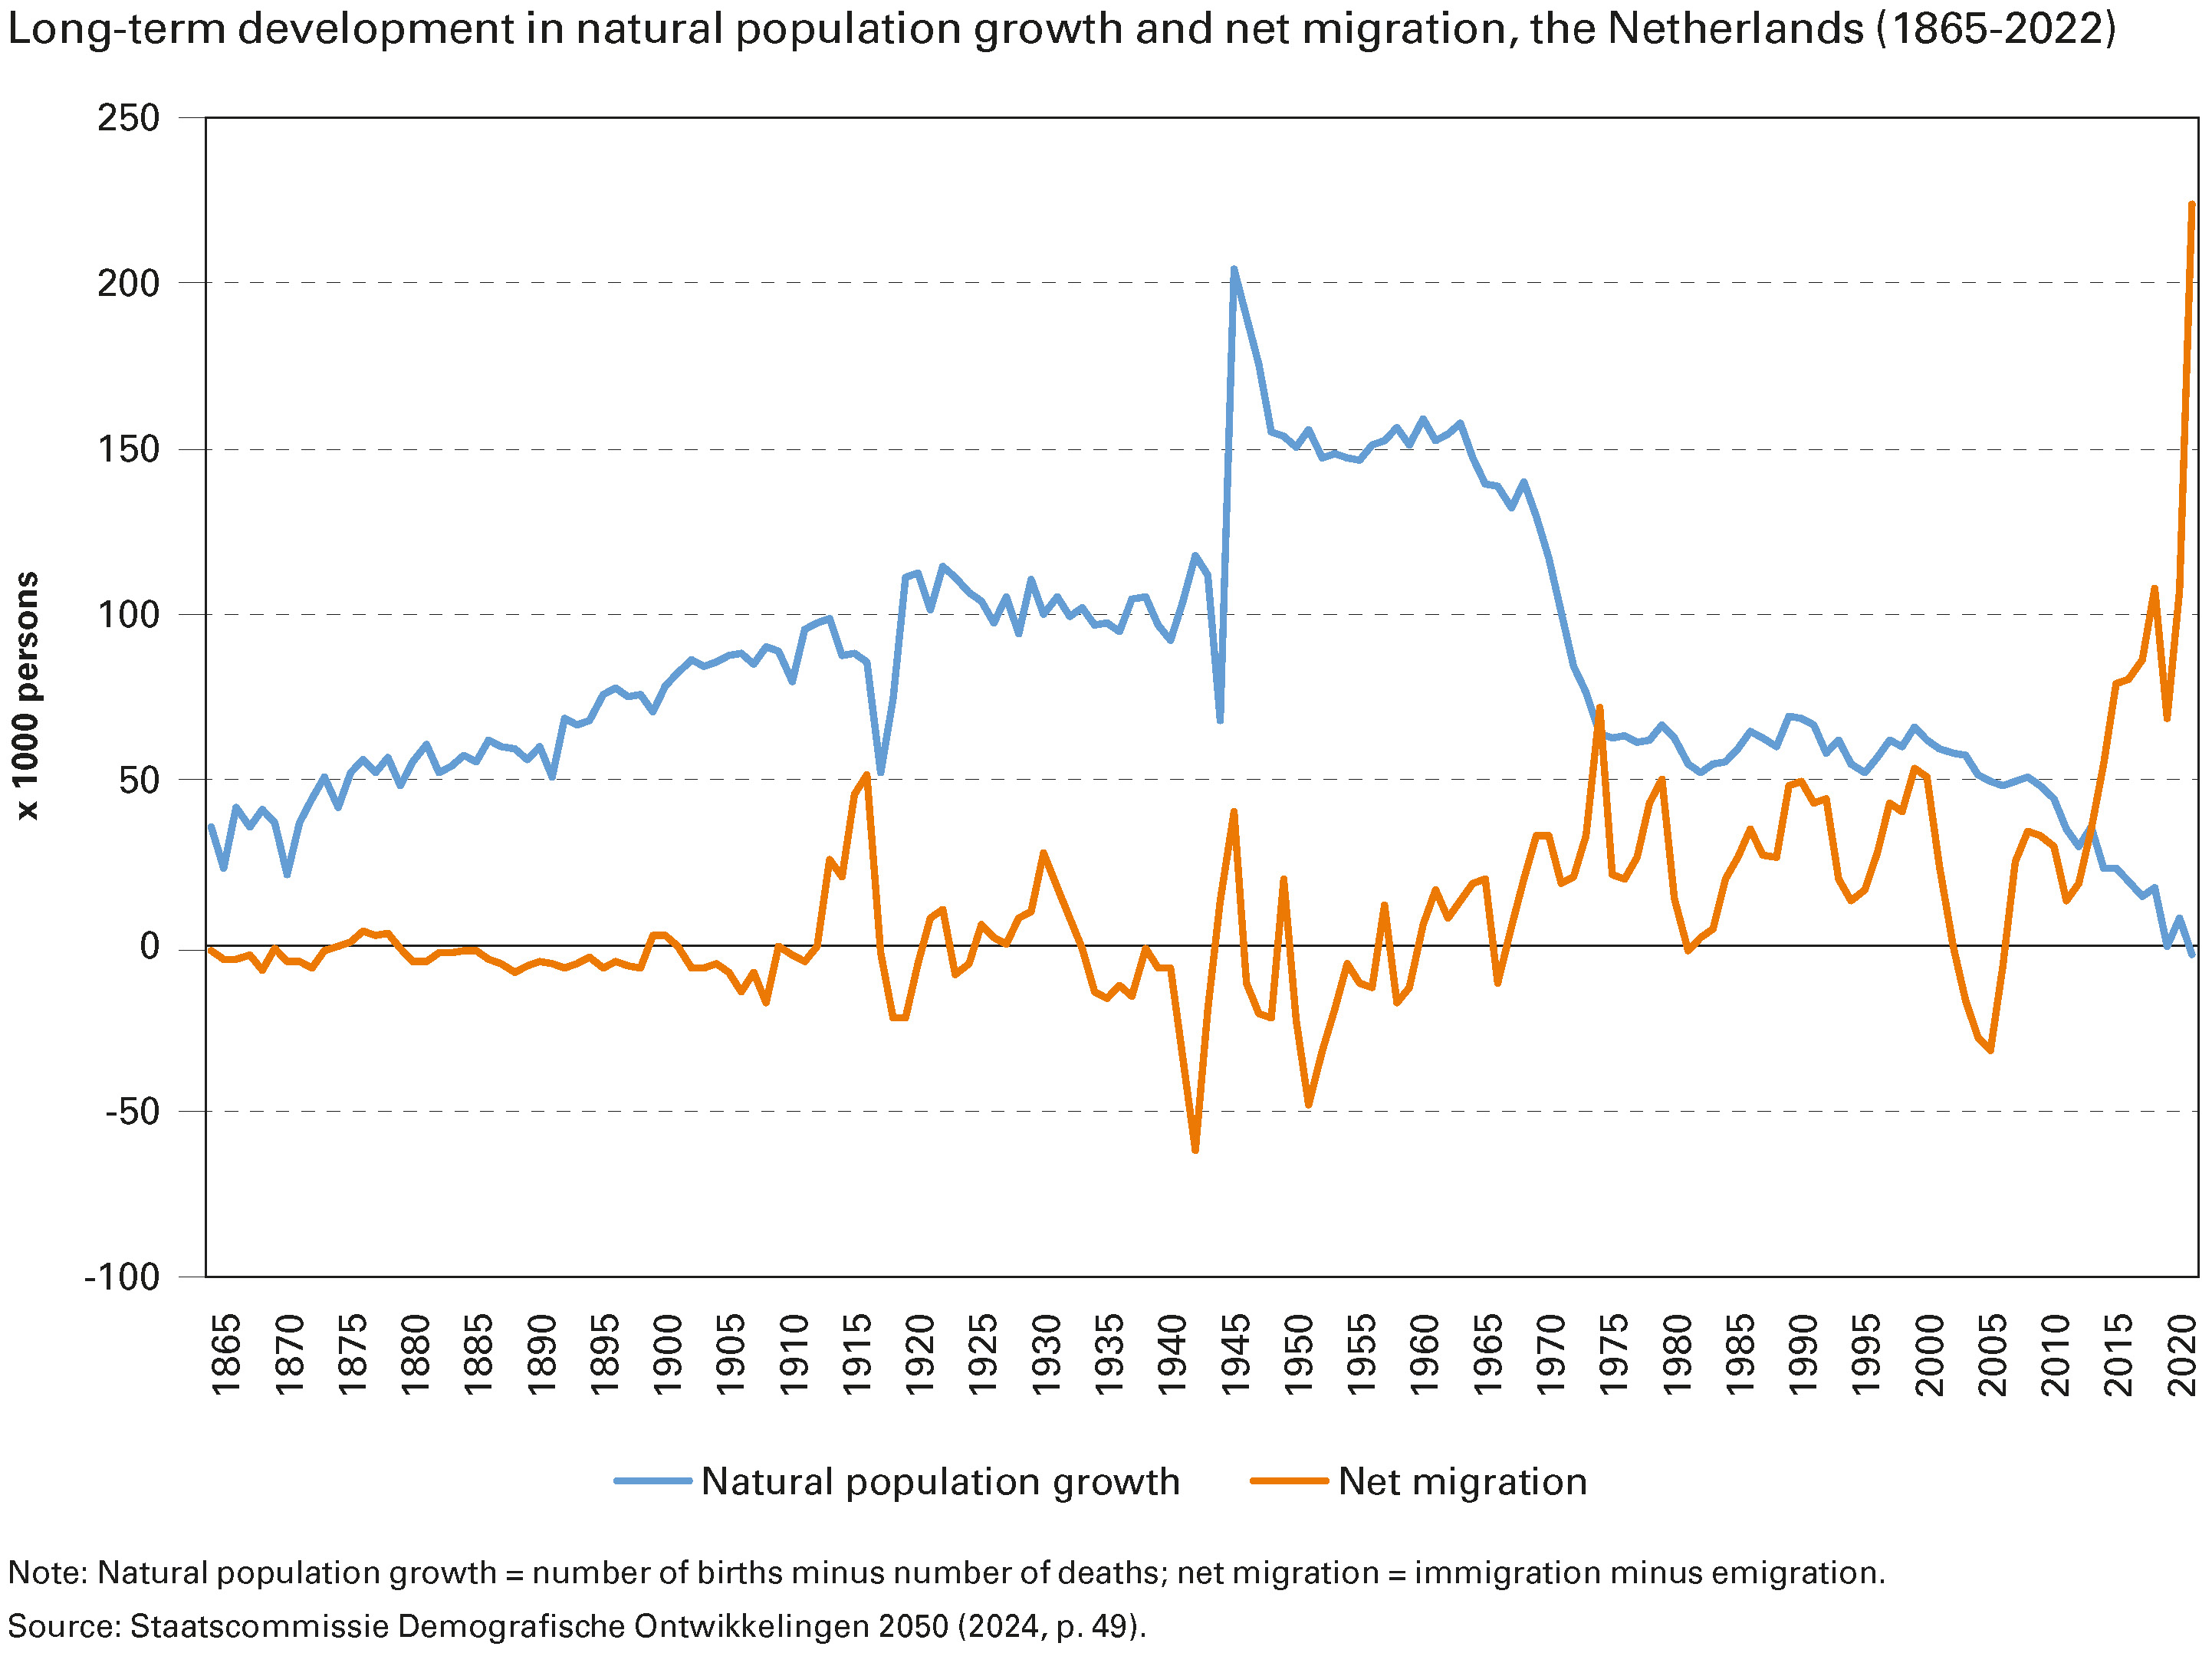 Long-term development in natural population growth and net migration, the Netherlands (1865-2022)